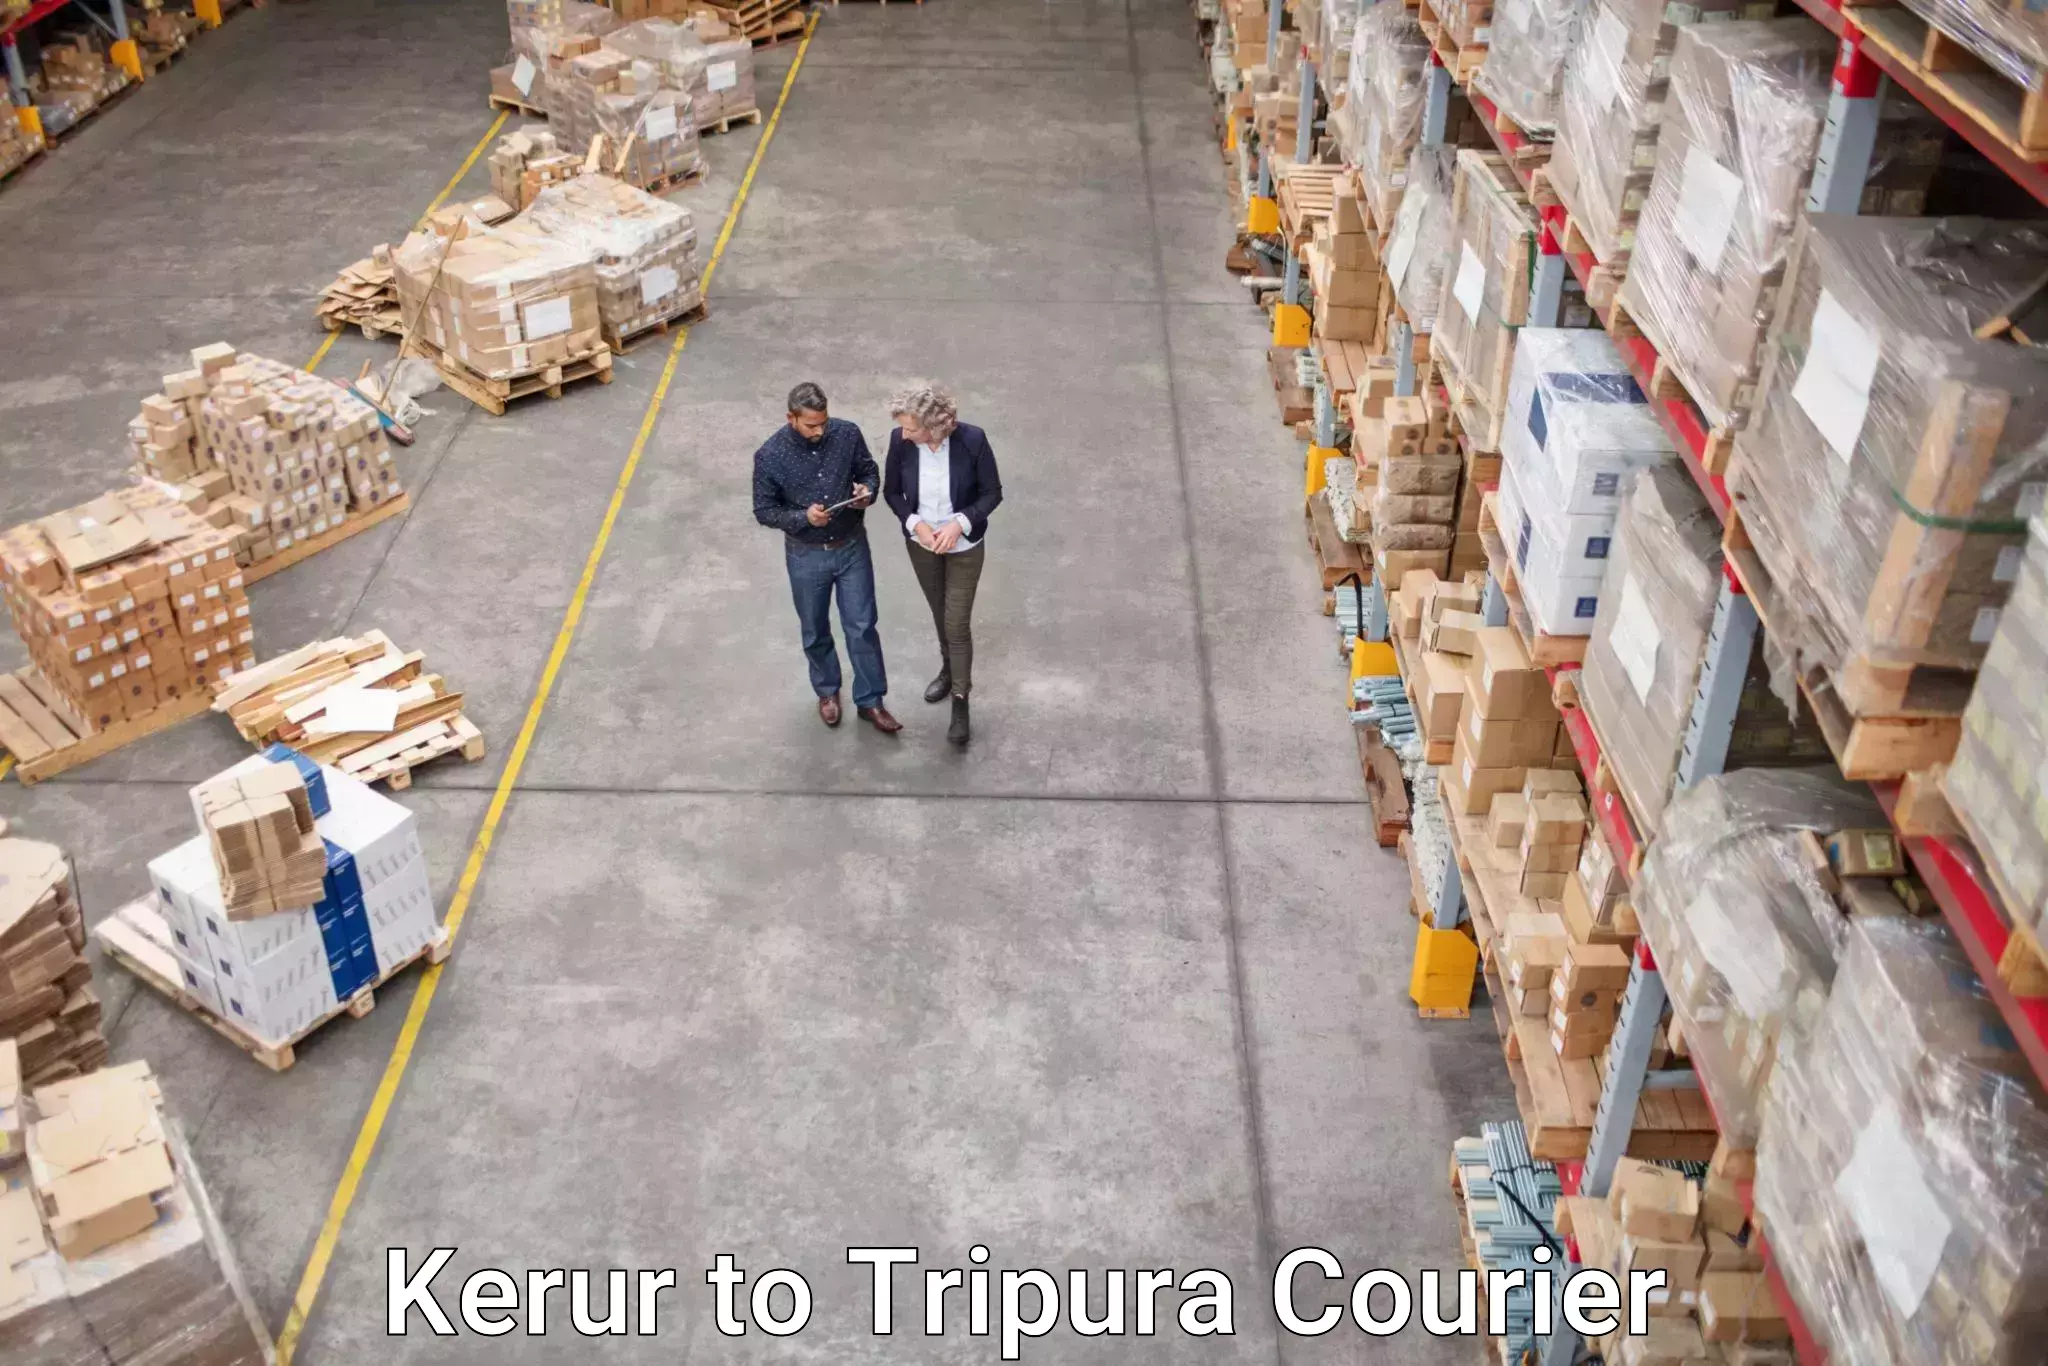 Scheduled delivery Kerur to Udaipur Tripura